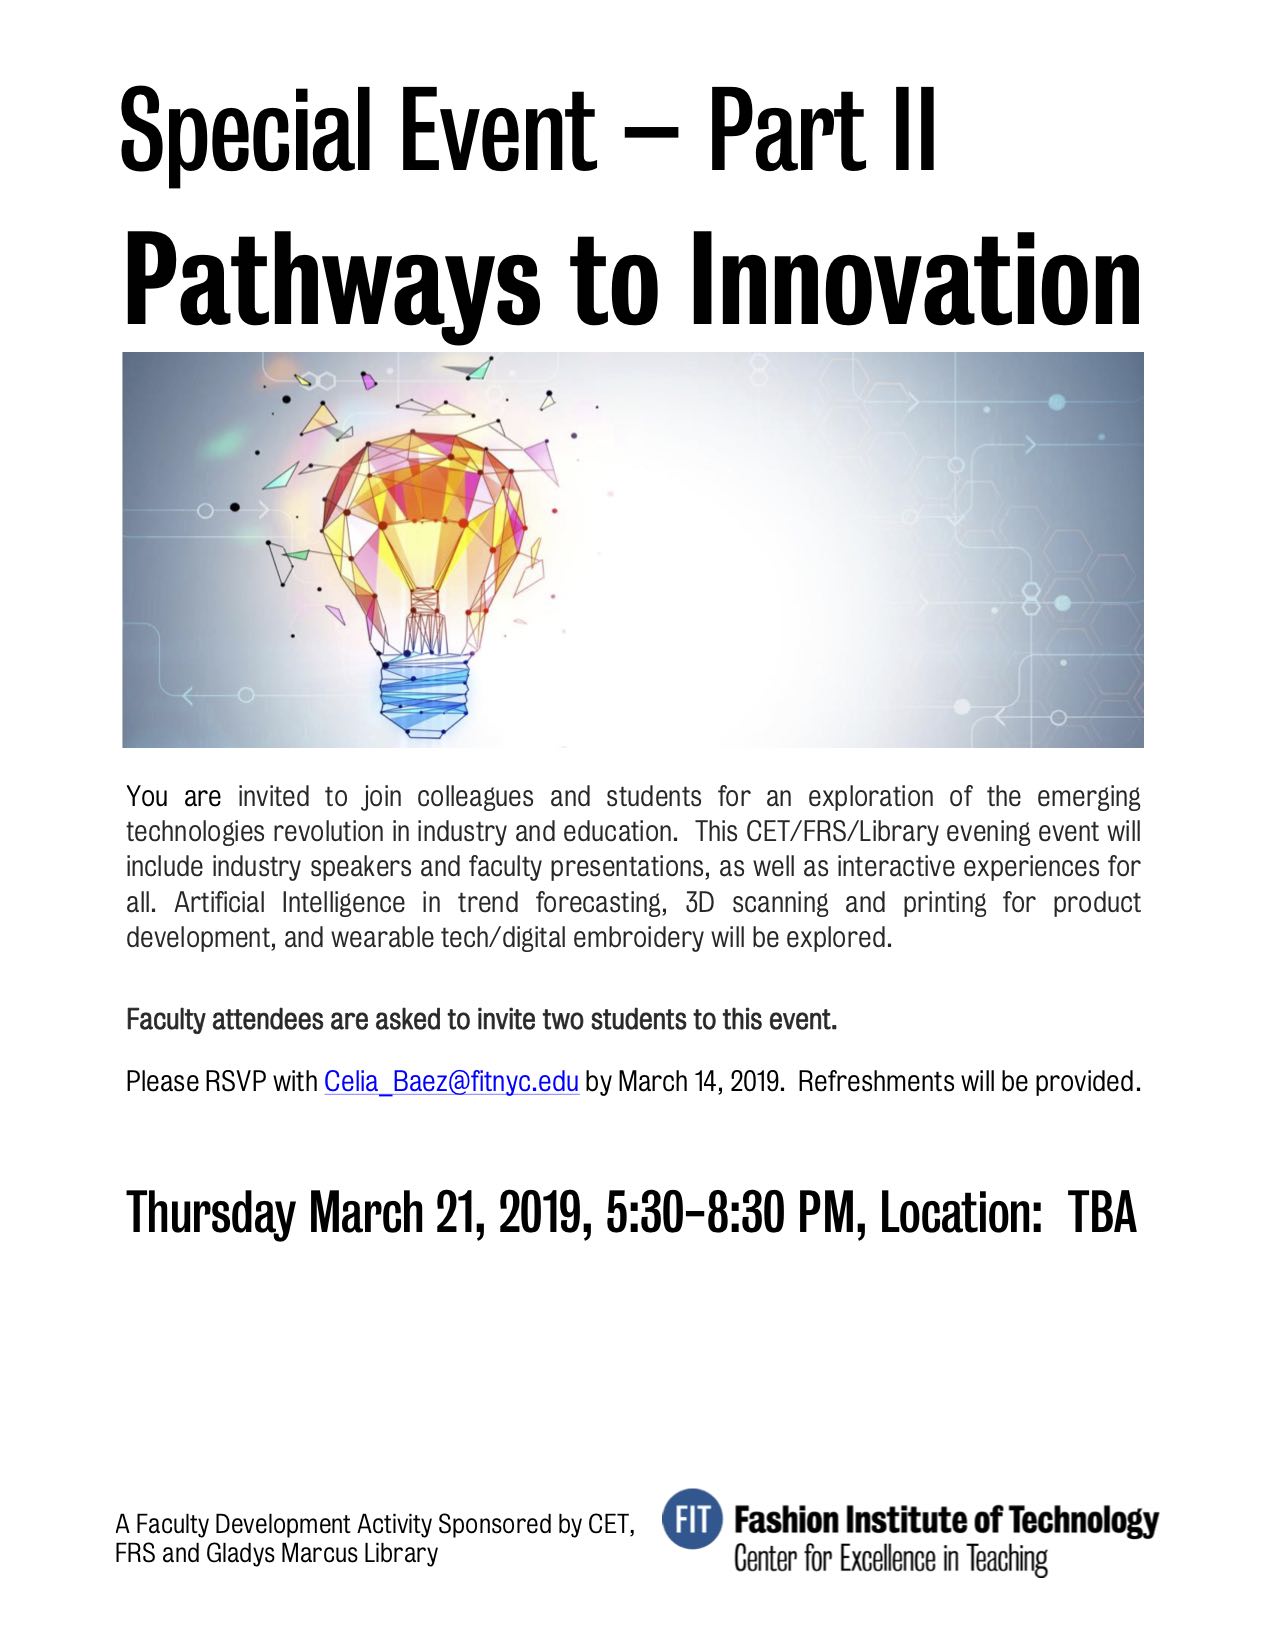 pathways to innovation 2 poster visuals